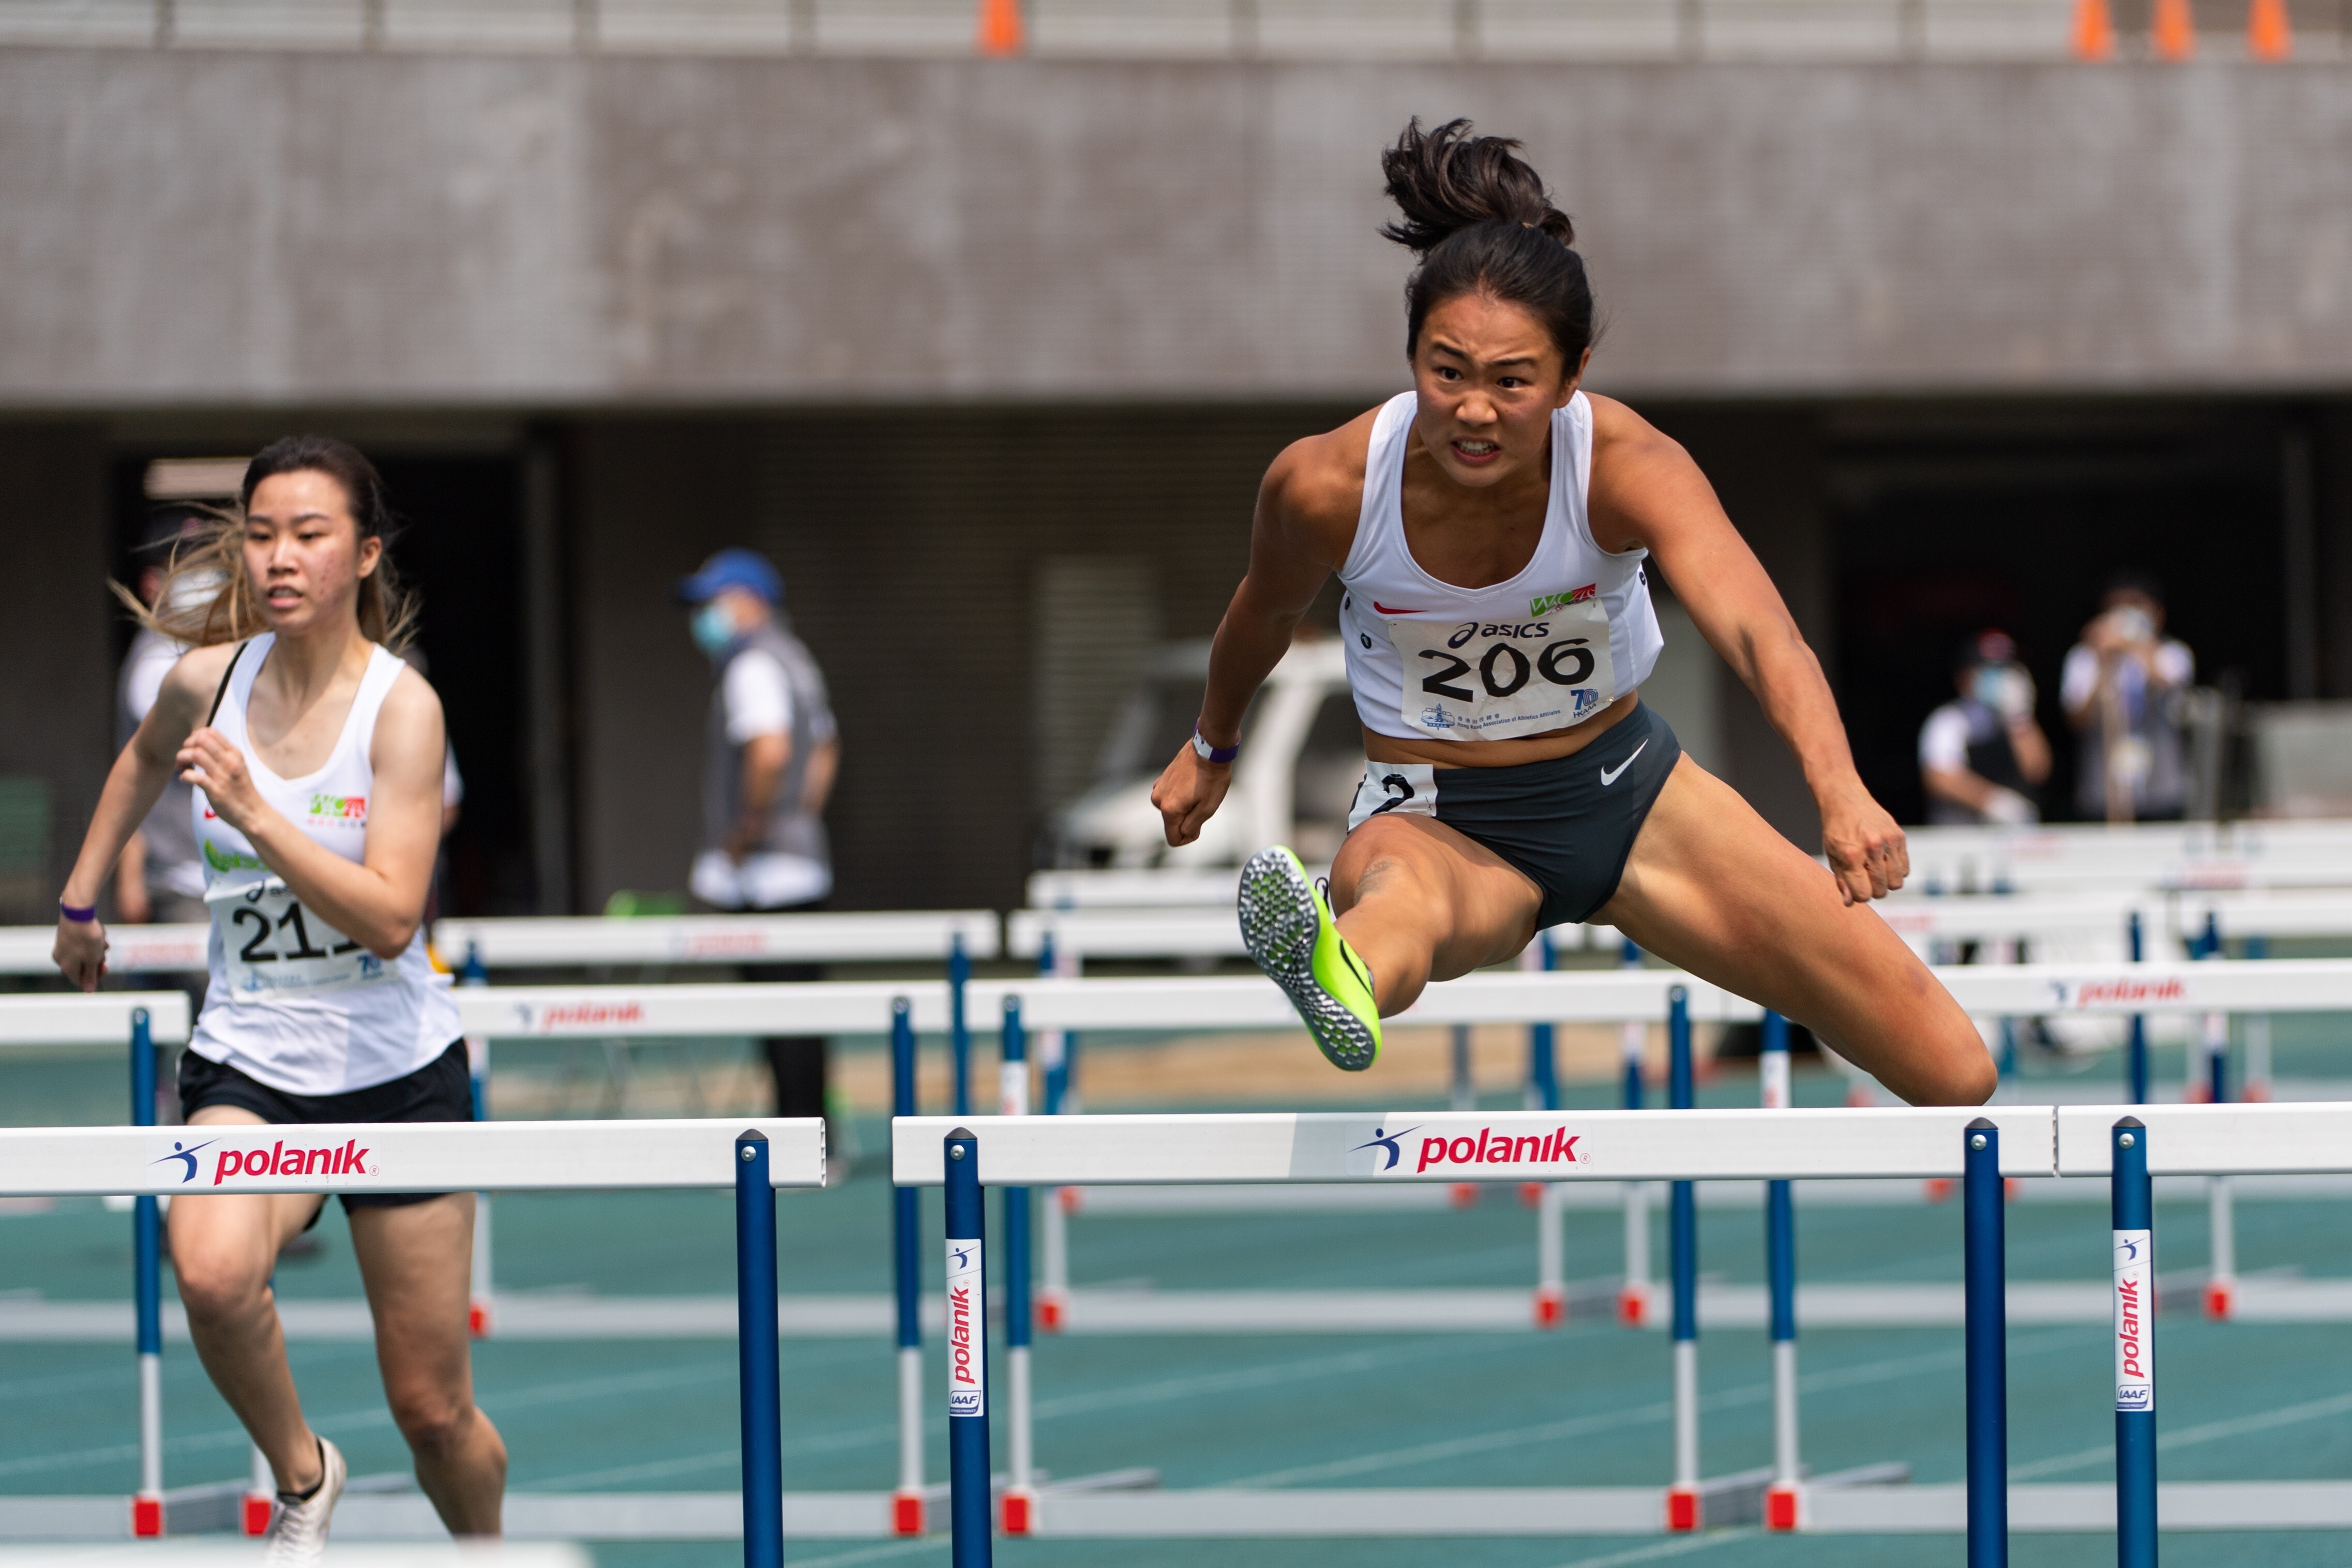 Vera Lui clears the hurdles on her way of winning the 100m women’s hurdles at the 2021 Athletics Series 1 at Tseung Kwan O Sports Ground in March. Photo: HKAAA